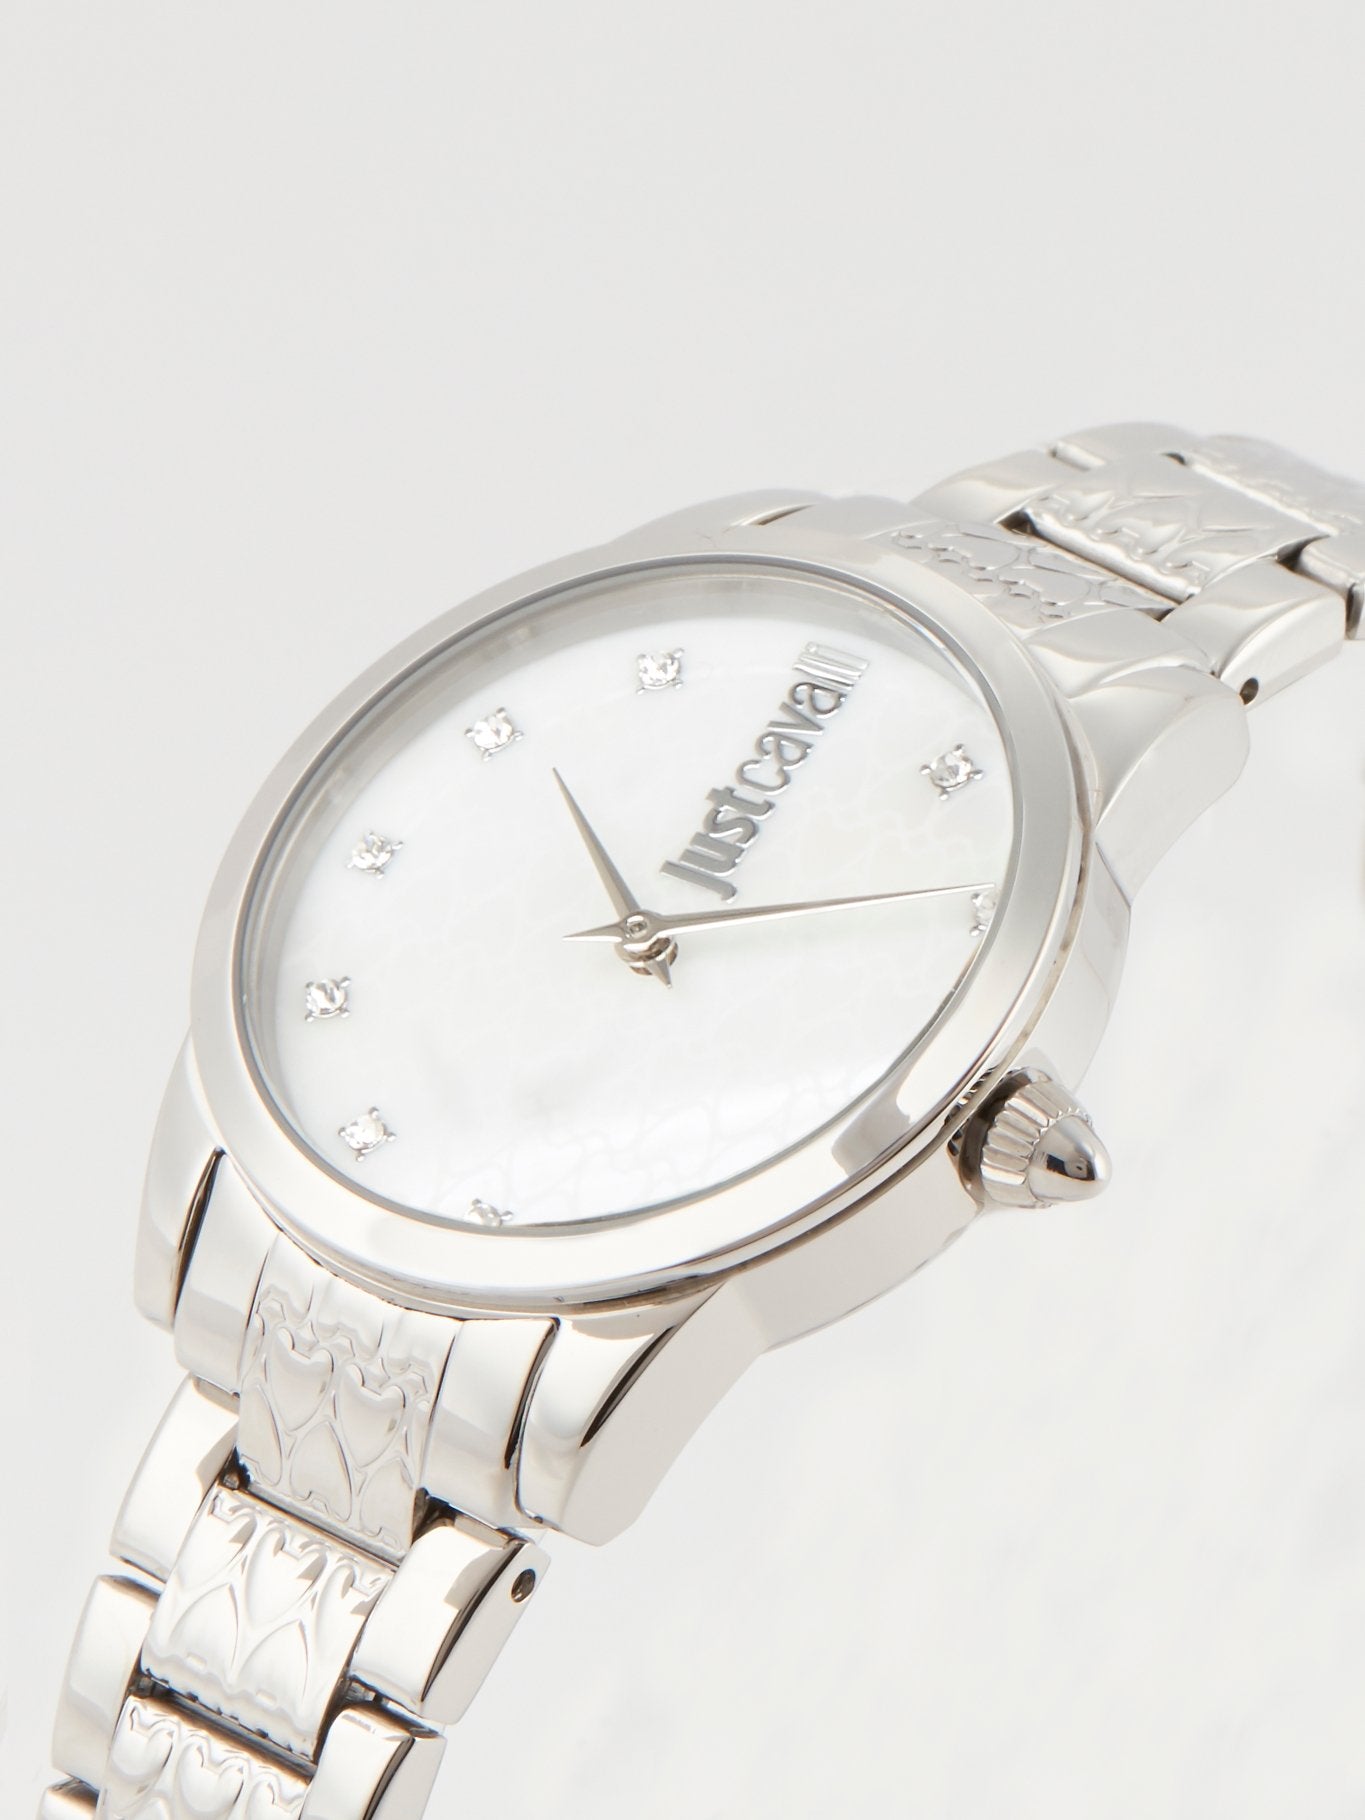 Vale's Silver Stainless Steel Watch